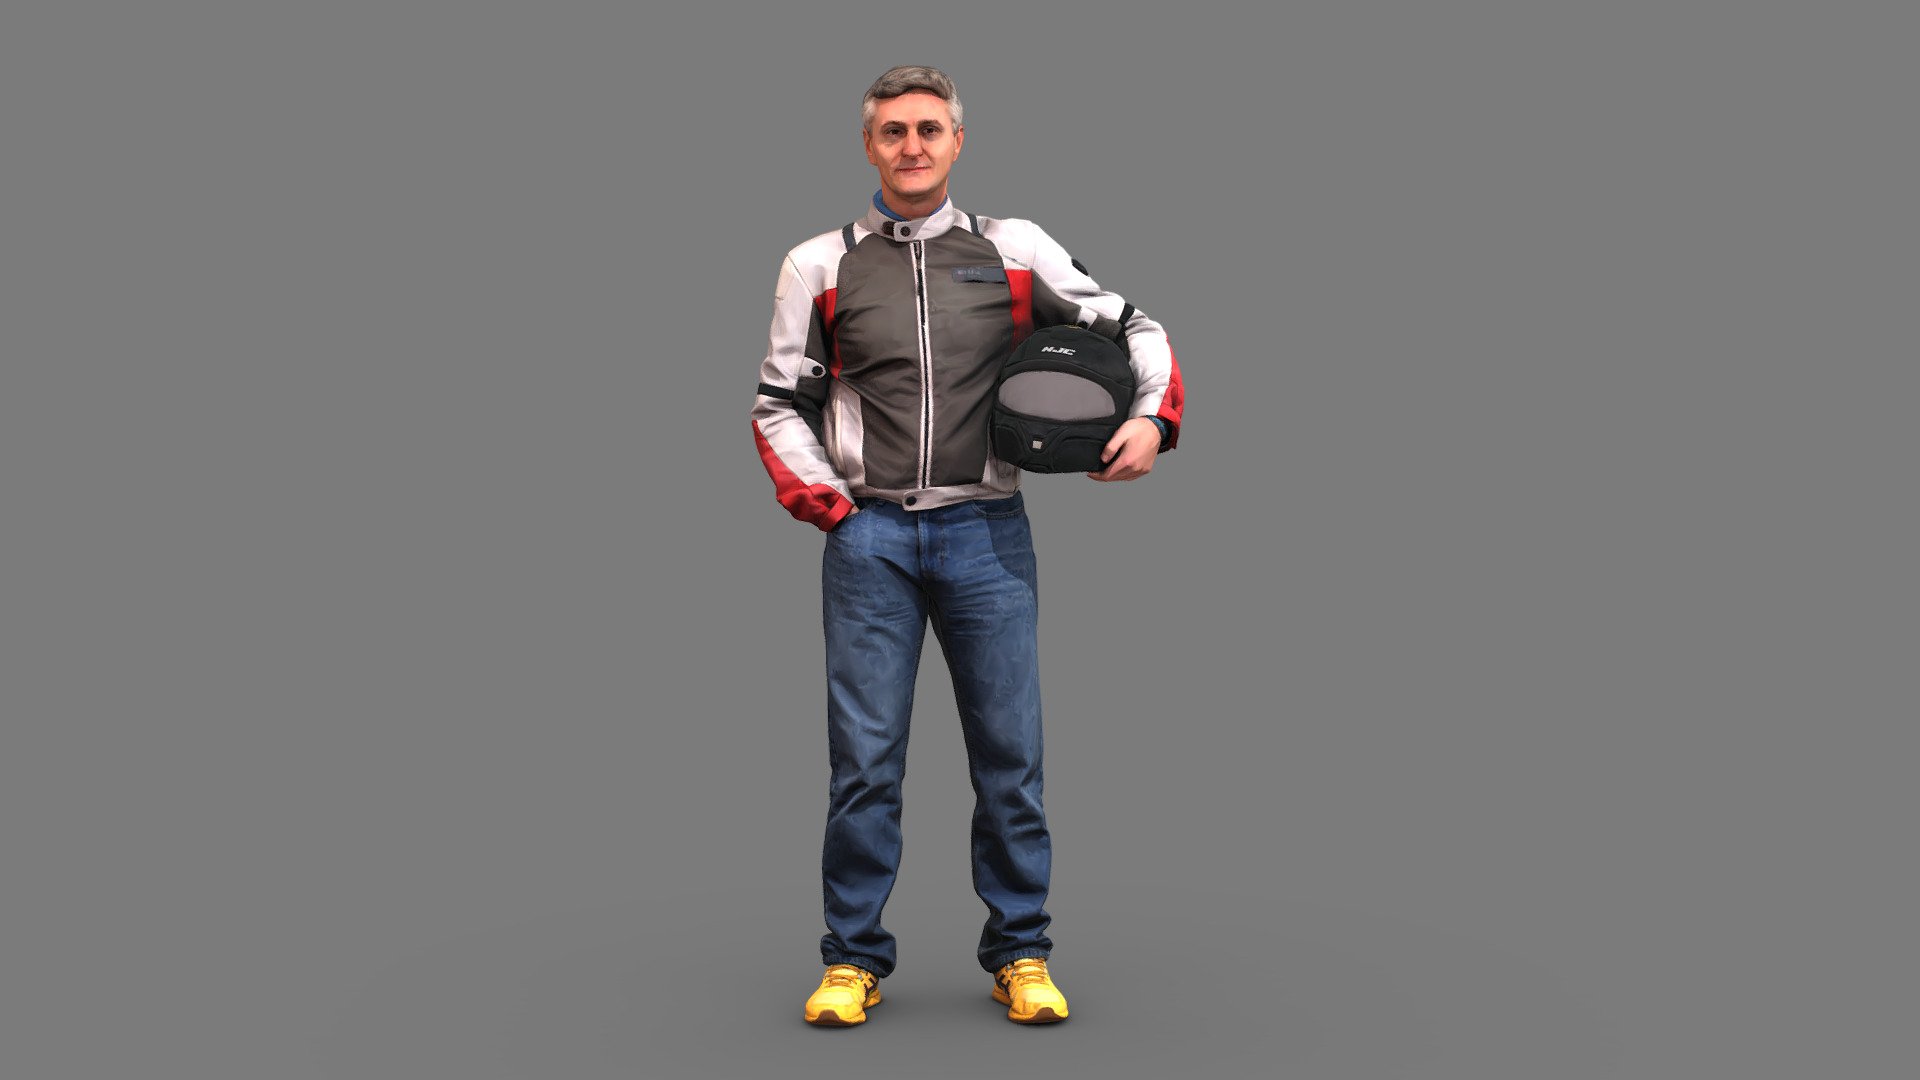 I offer a 3D digital model of a motorcyclist with precise details and gear customization. Ideal for motorcycle enthusiasts, graphic designers and advertising creatives. The model allows to see the motorcyclist in different angles and to change the color of the jacket and helmet. Get this 3D digital model now!
Can be printed in any method you want, can also be used for 3D animation 3d model